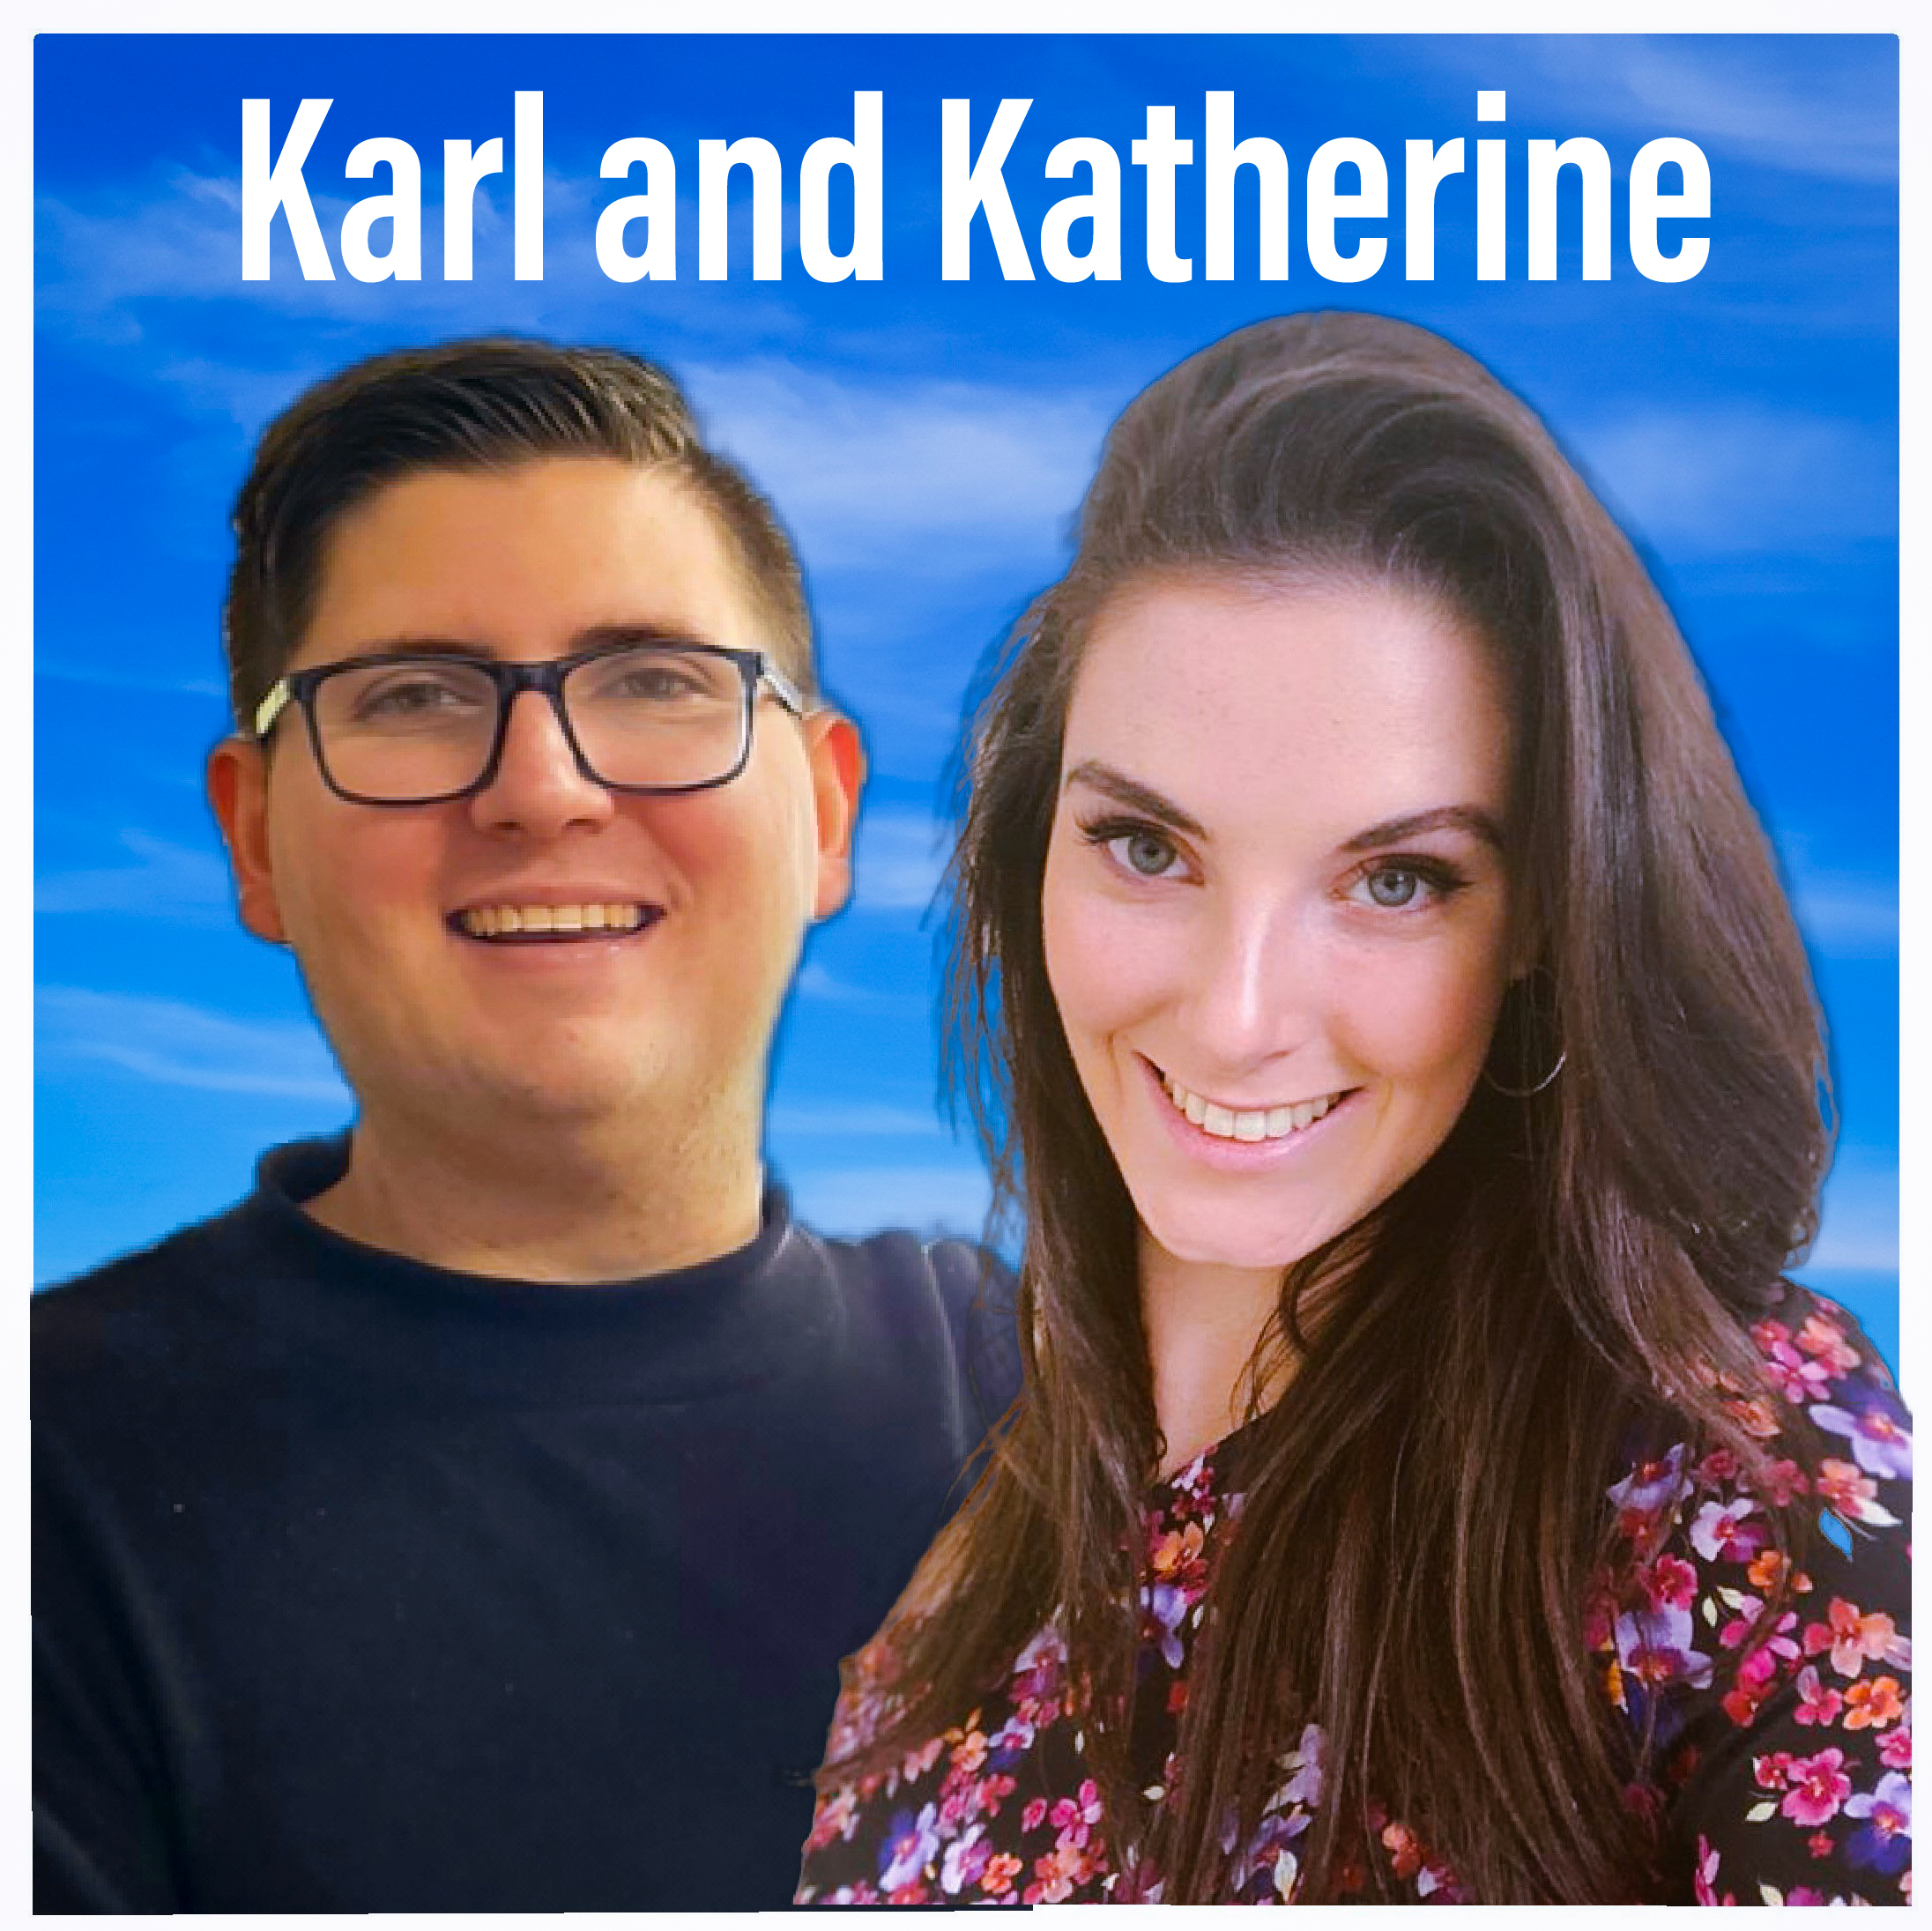 Karl and Katherine - Friday 11th June 2021